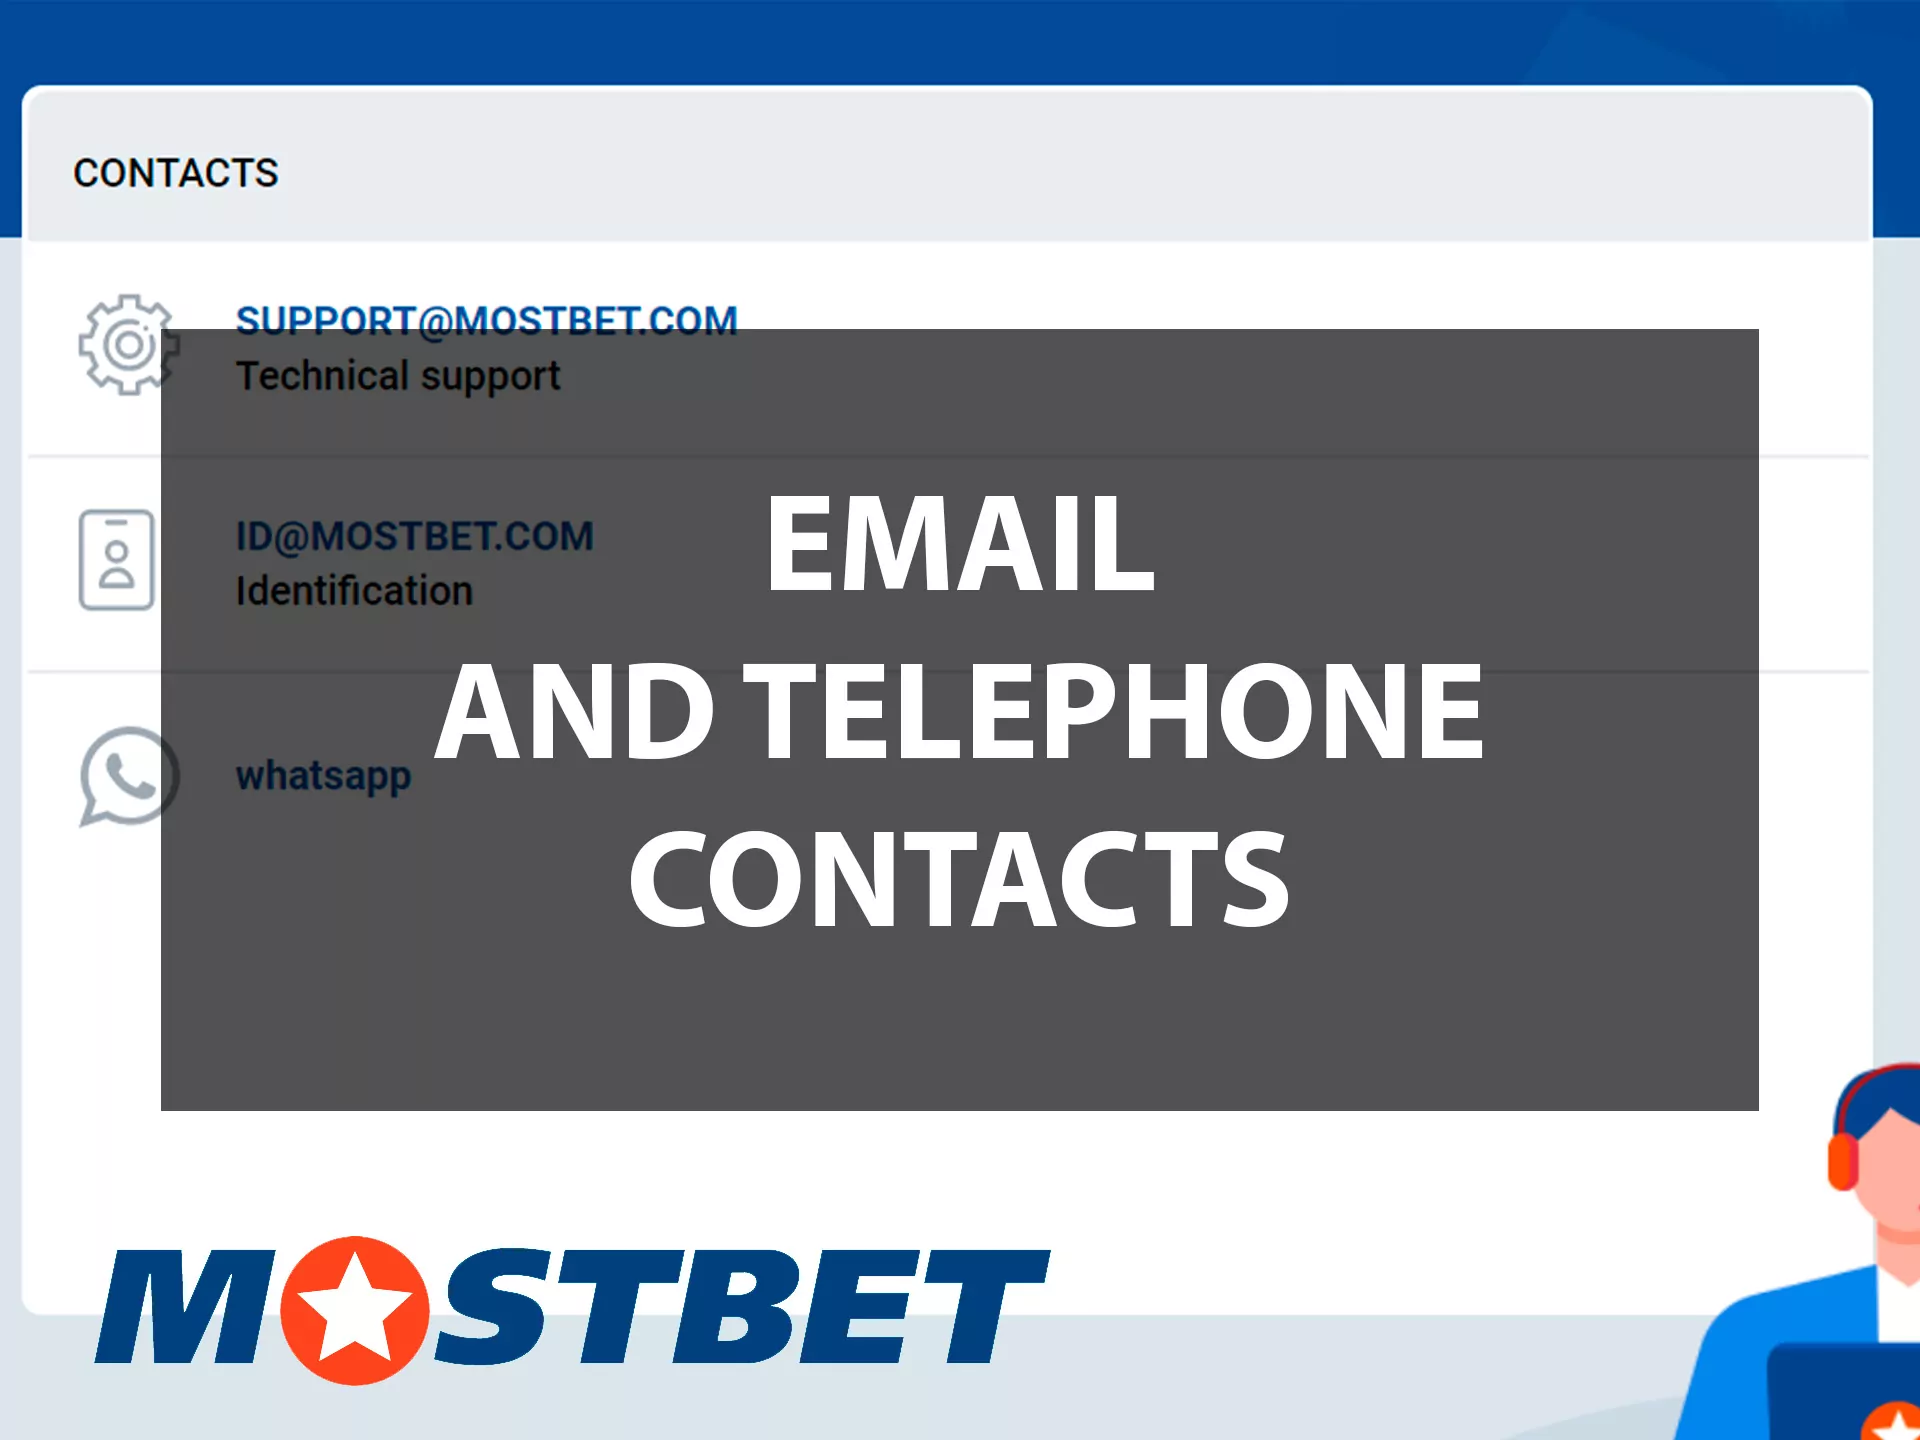 You can contact the Mostbet support team ehenever you have betting-related questions.